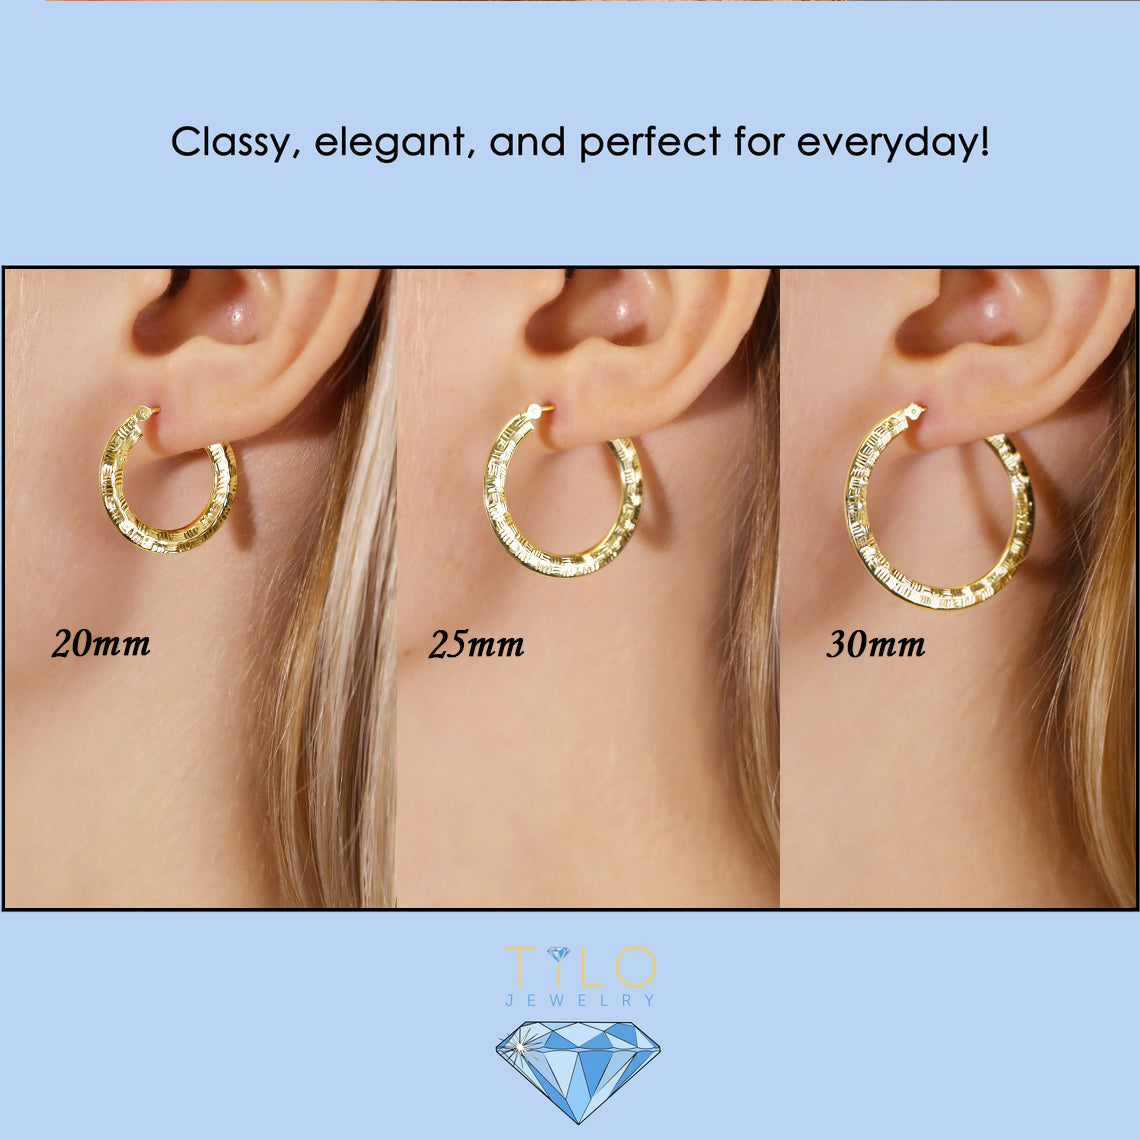 14K Yellow Gold Checkered Hand Engraving Hoop Earrings - 1 inch 30mm (1.2 inch)